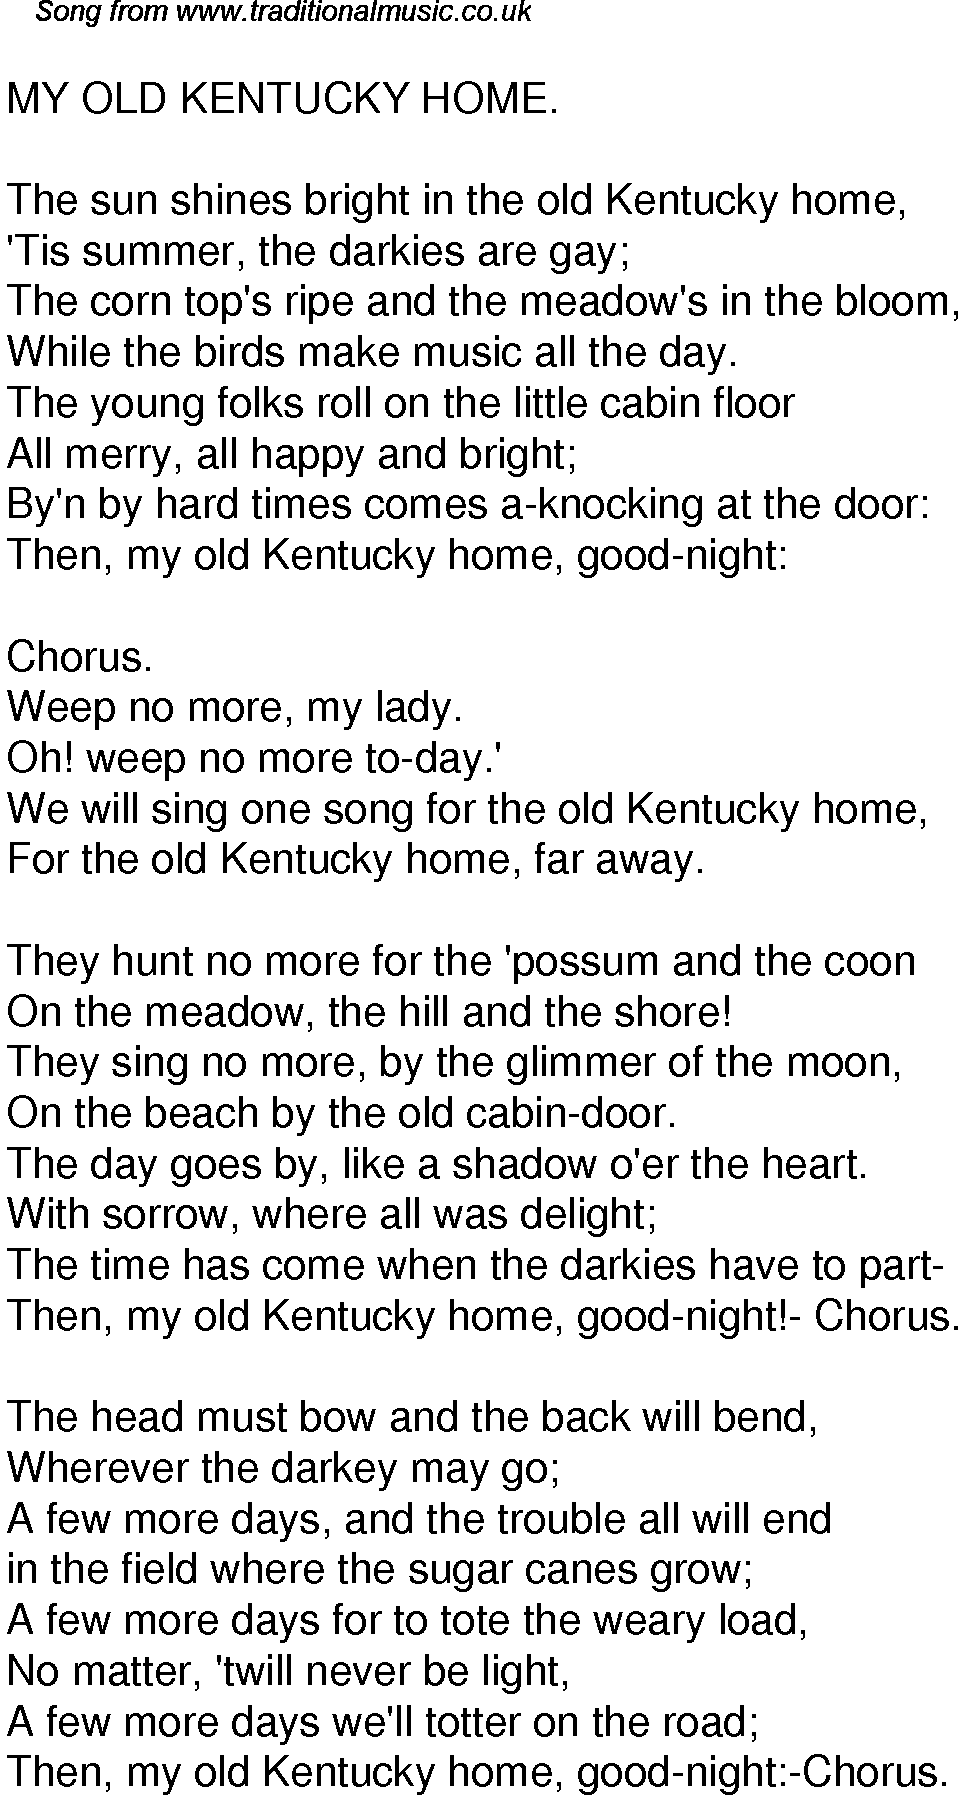 Old Time Song Lyrics For 59 My Old Kentucky Home 